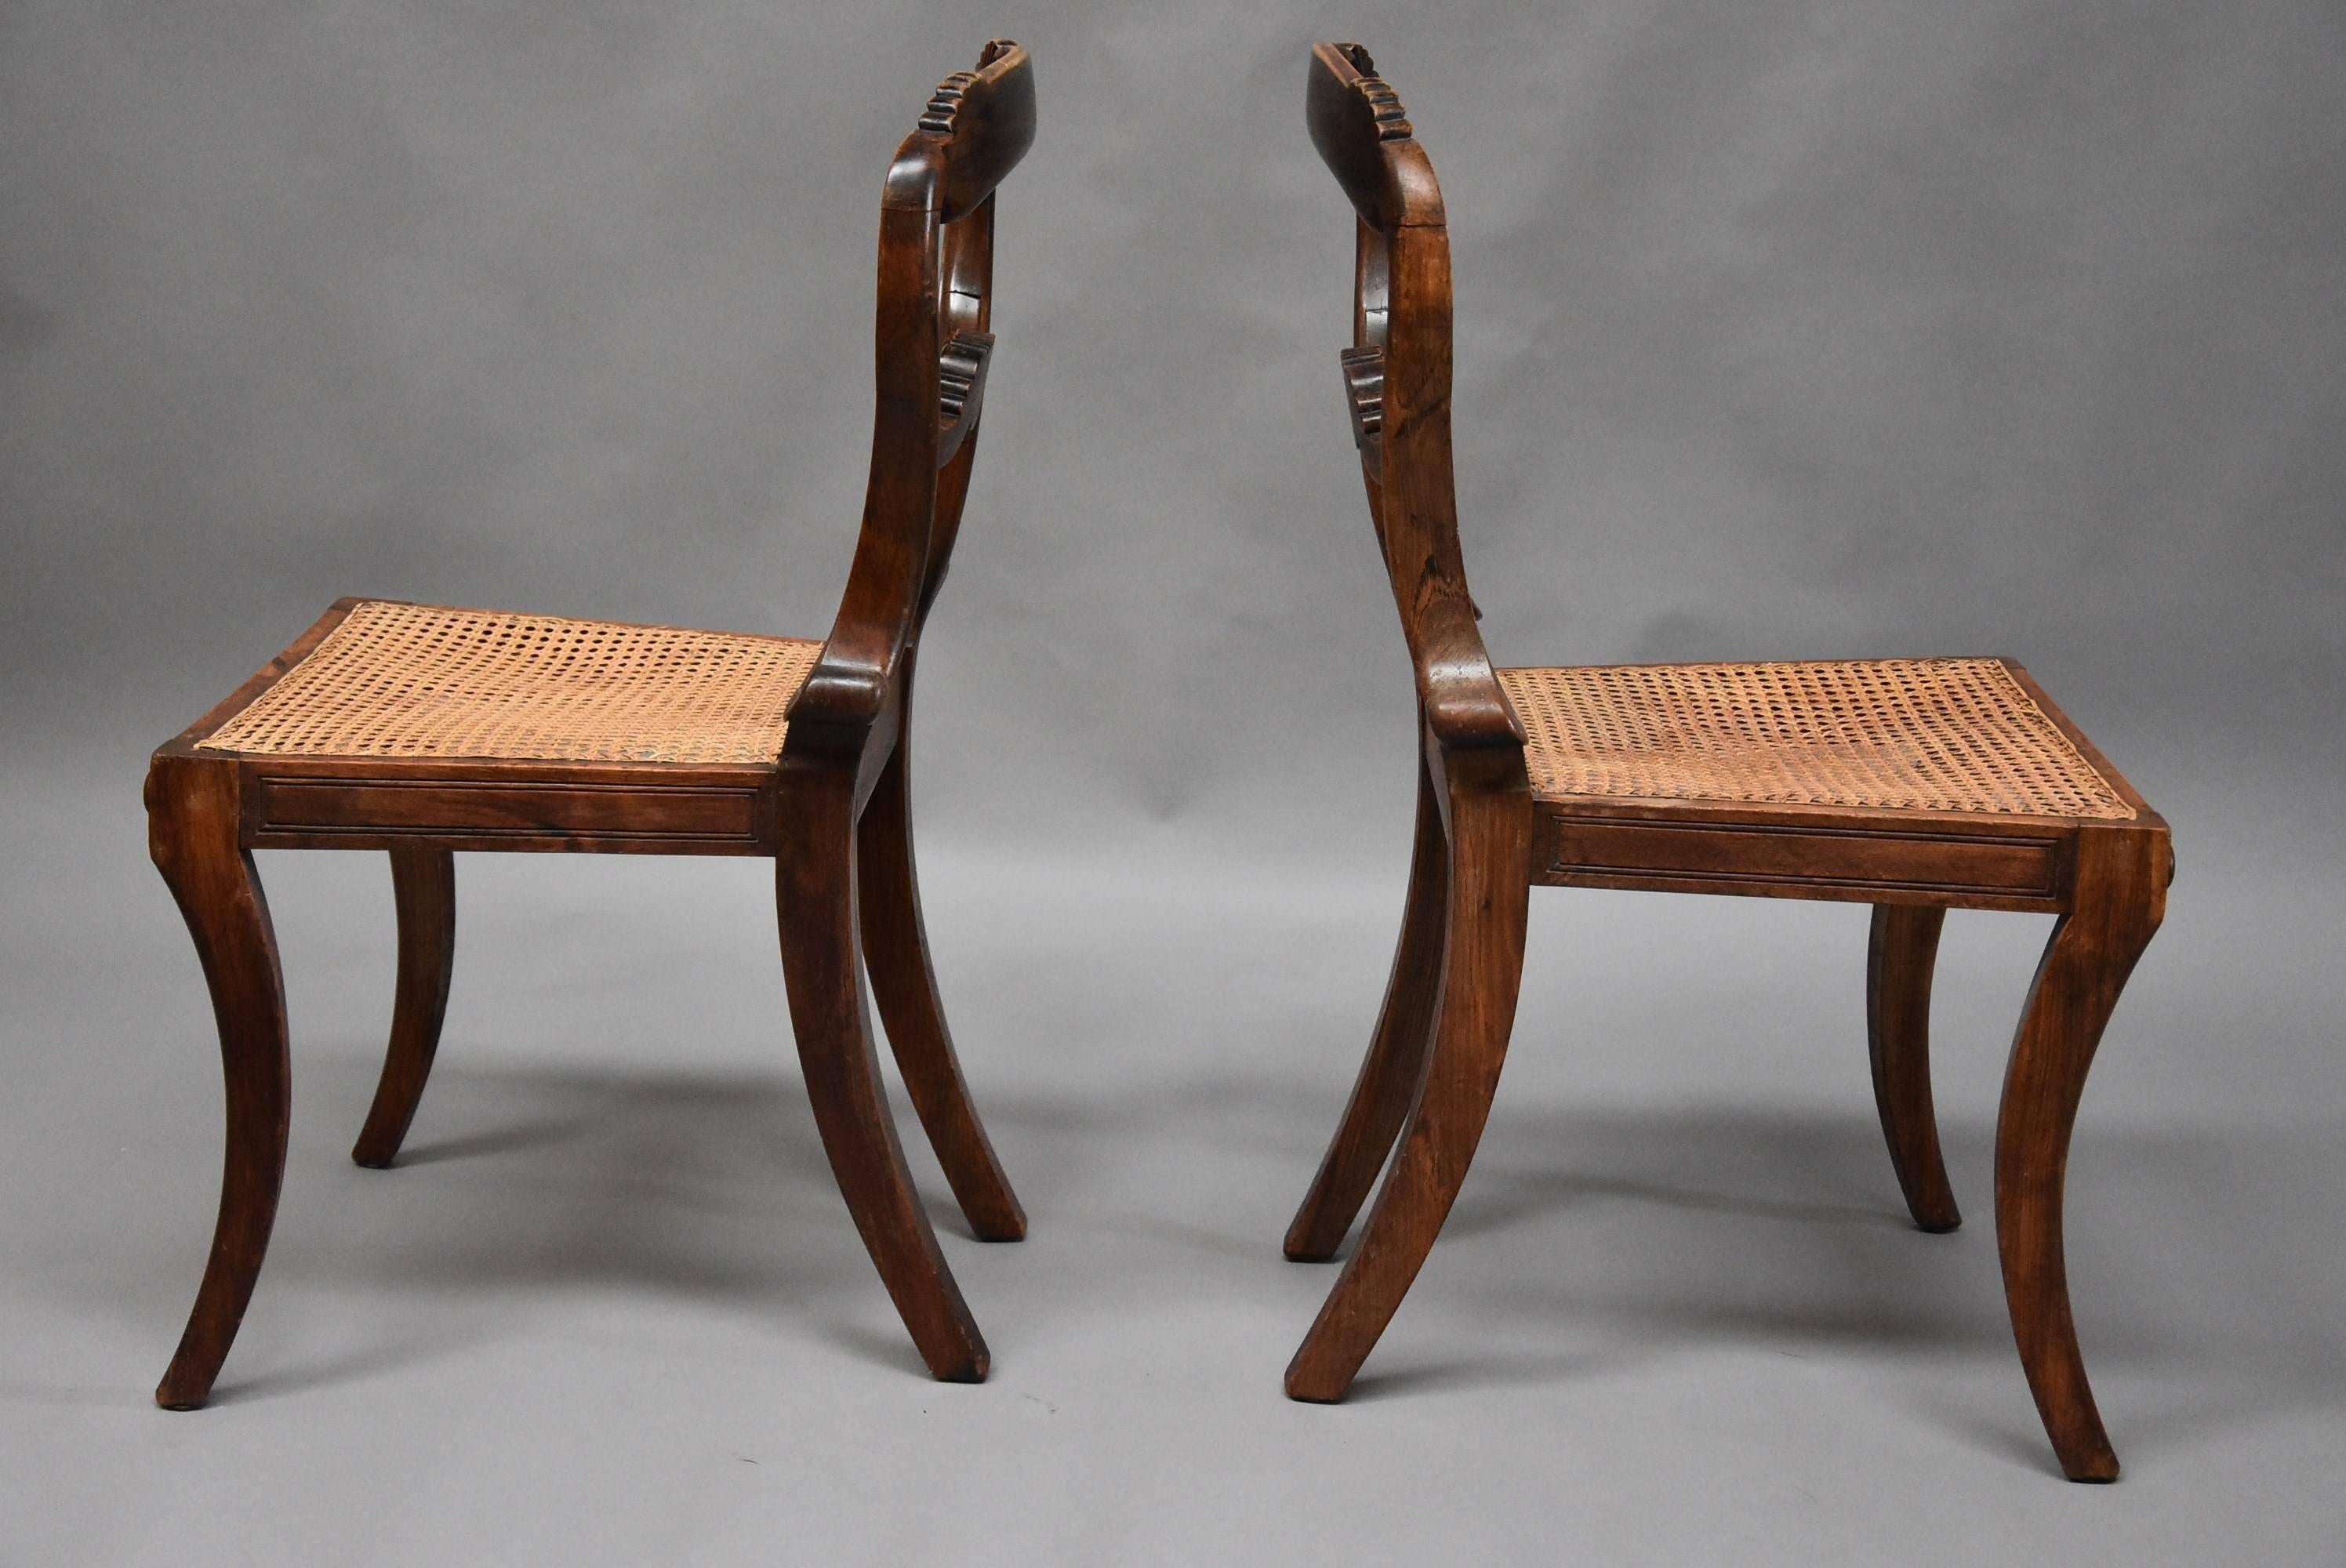 Pair of 19th Century Simulated Rosewood Regency Chairs in the Manner of Gillows 3